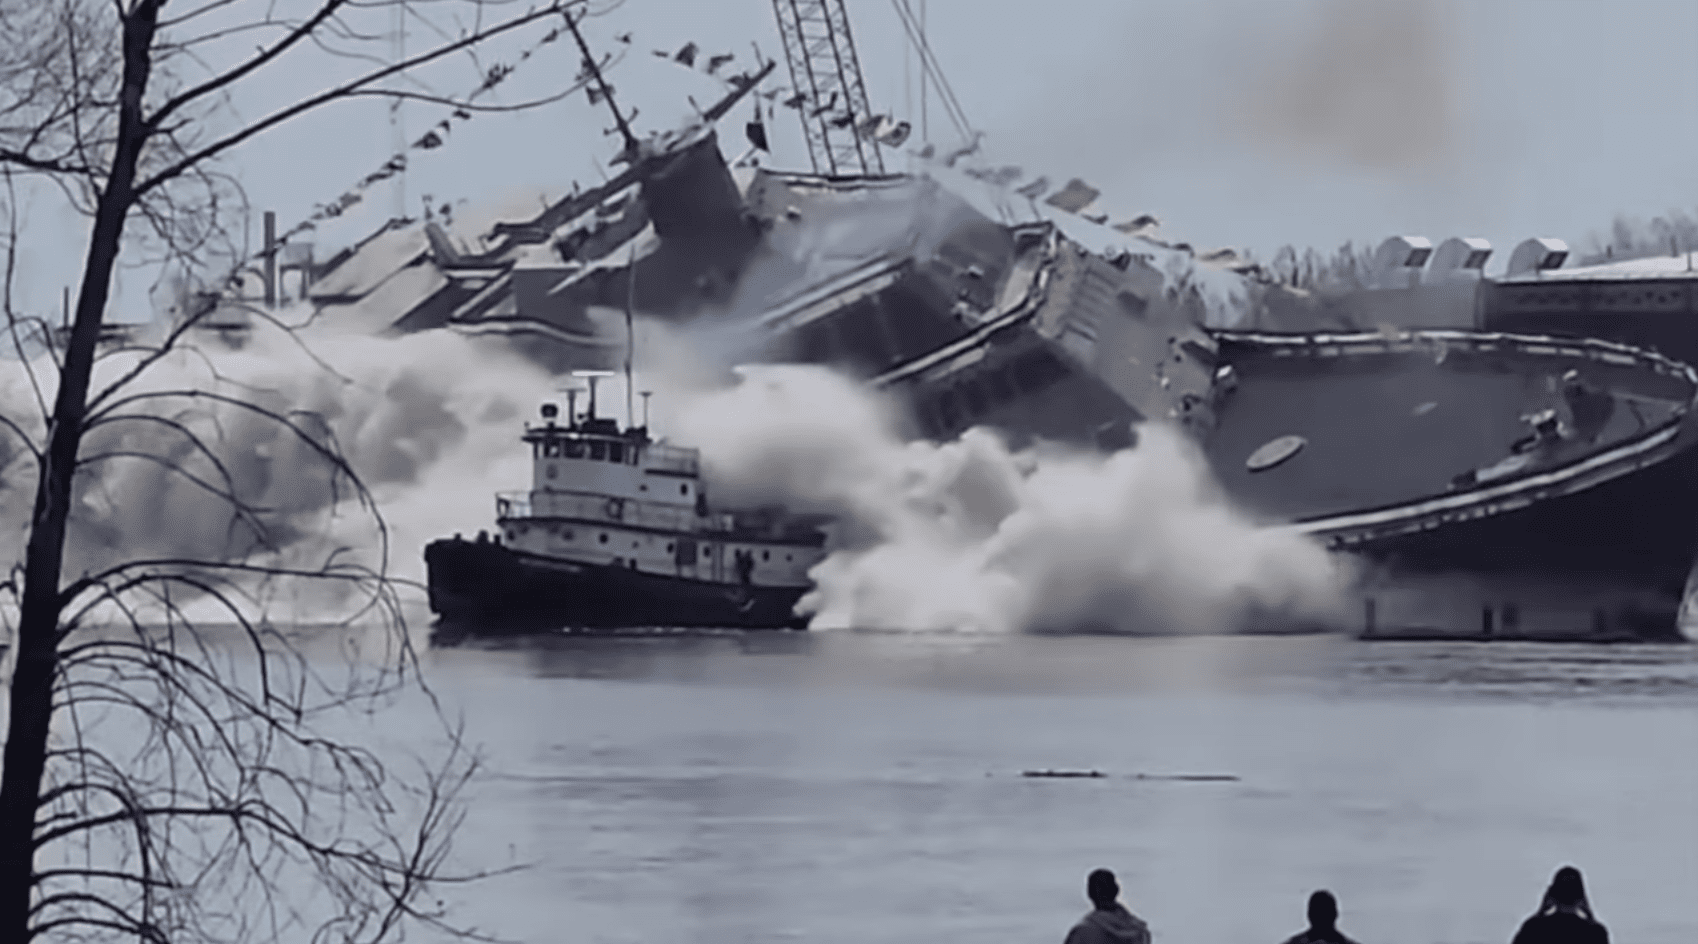 Watch: USS Cleveland Hits Tug During Side-Launch